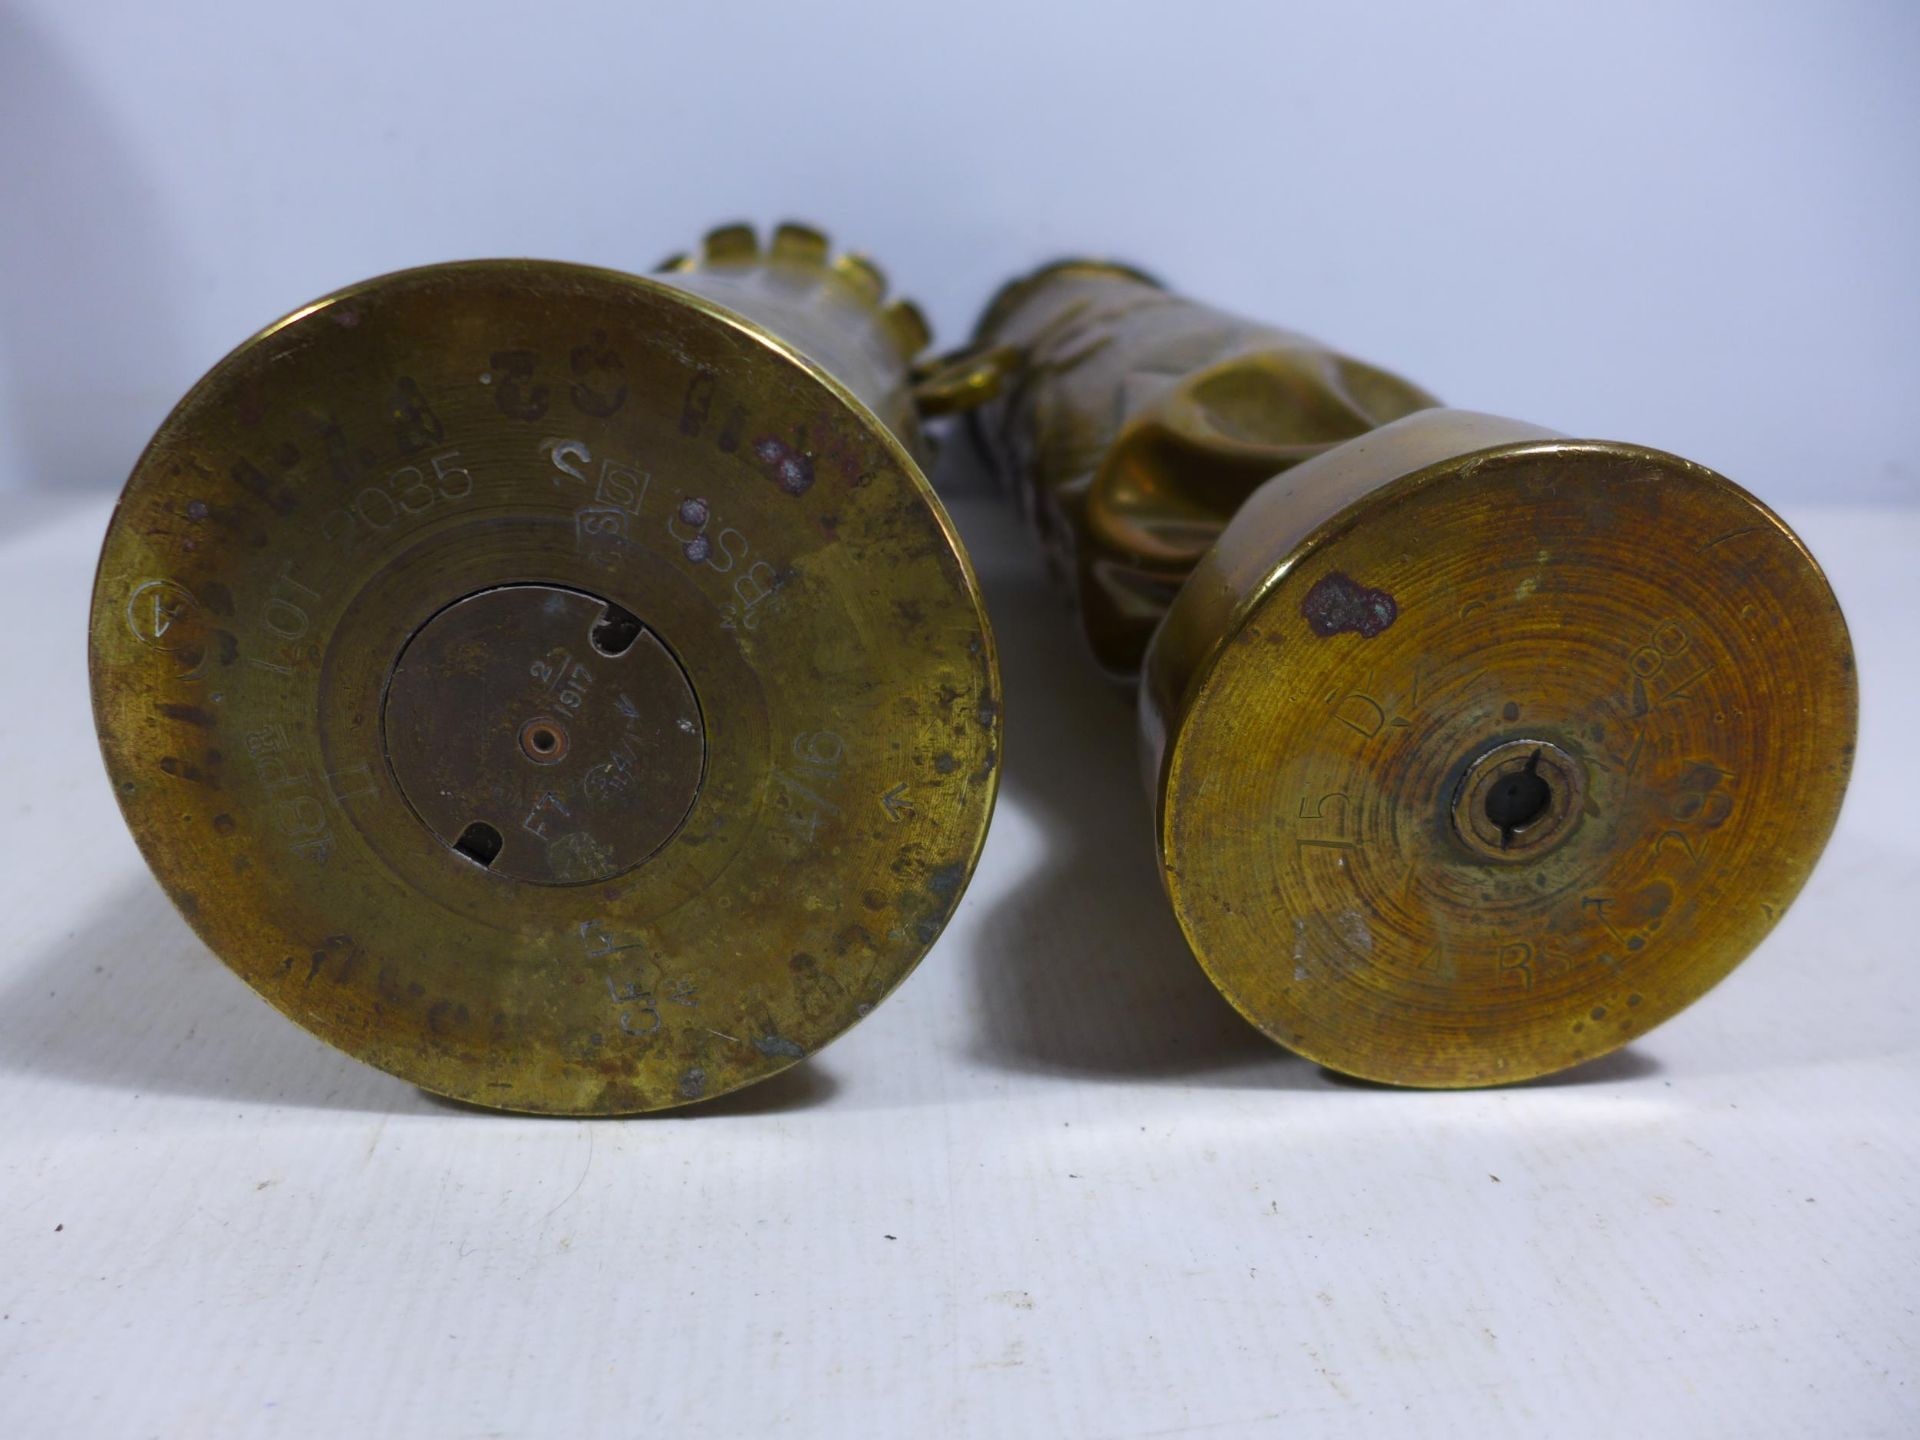 TWO BRASS WORLD WAR I TRENCH ART SHELL VASES, HEIGHTS 29CM AND 34CM - Image 3 of 3